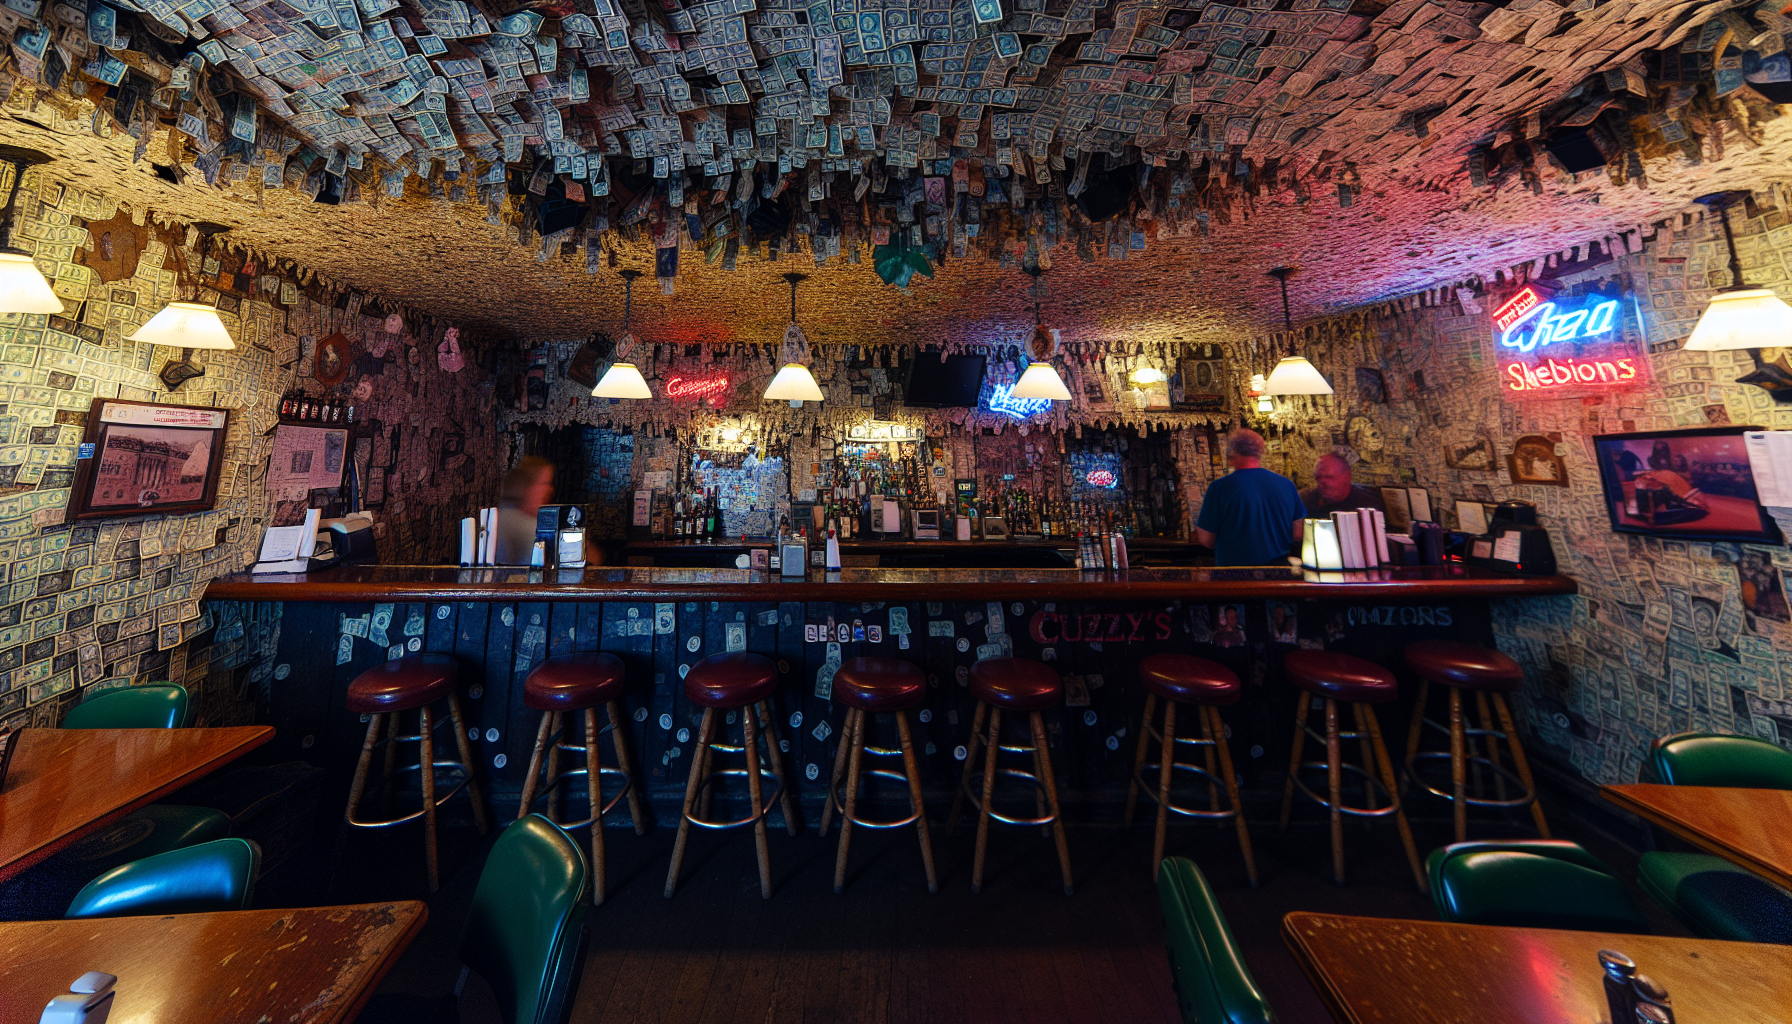 Interior of Cuzzy's with dollar bills adorning the walls and ceiling